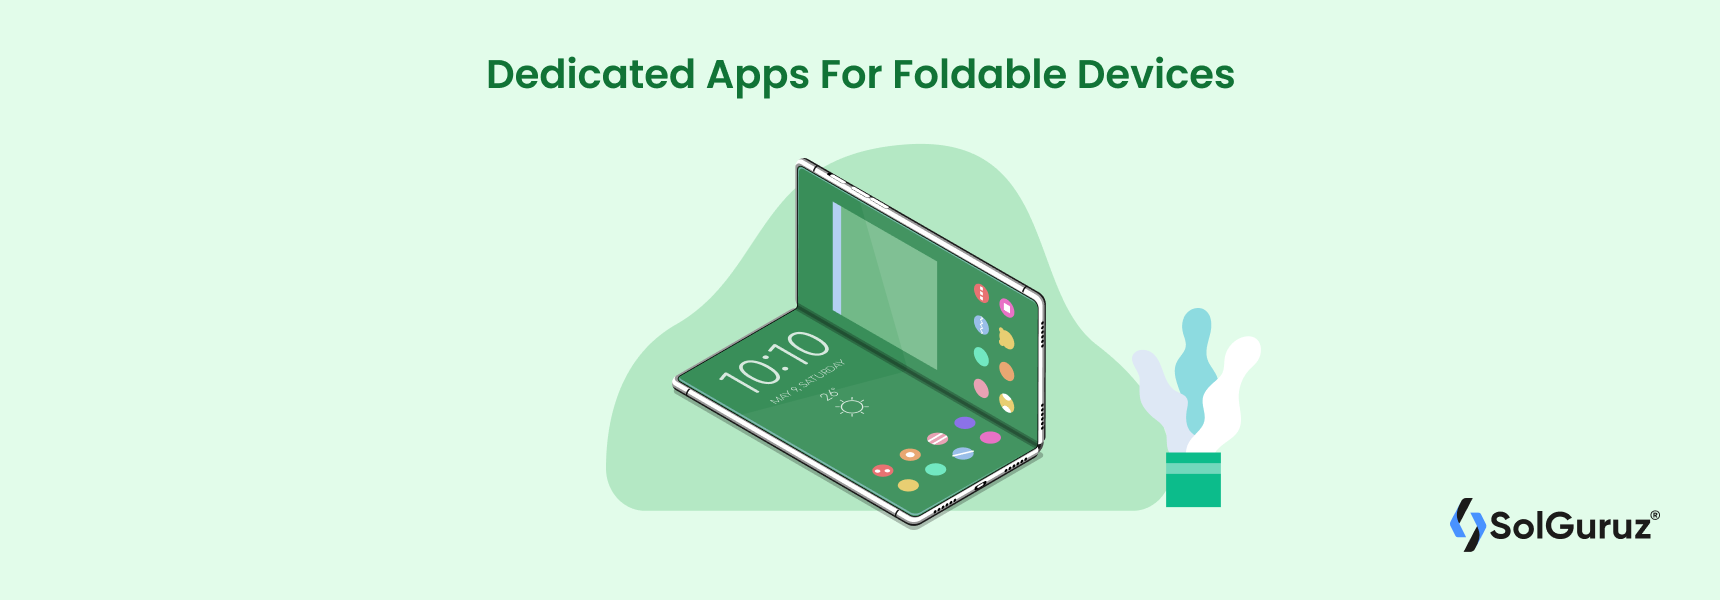 Dedicated Apps for Foldable Devices - Android App Development Trends